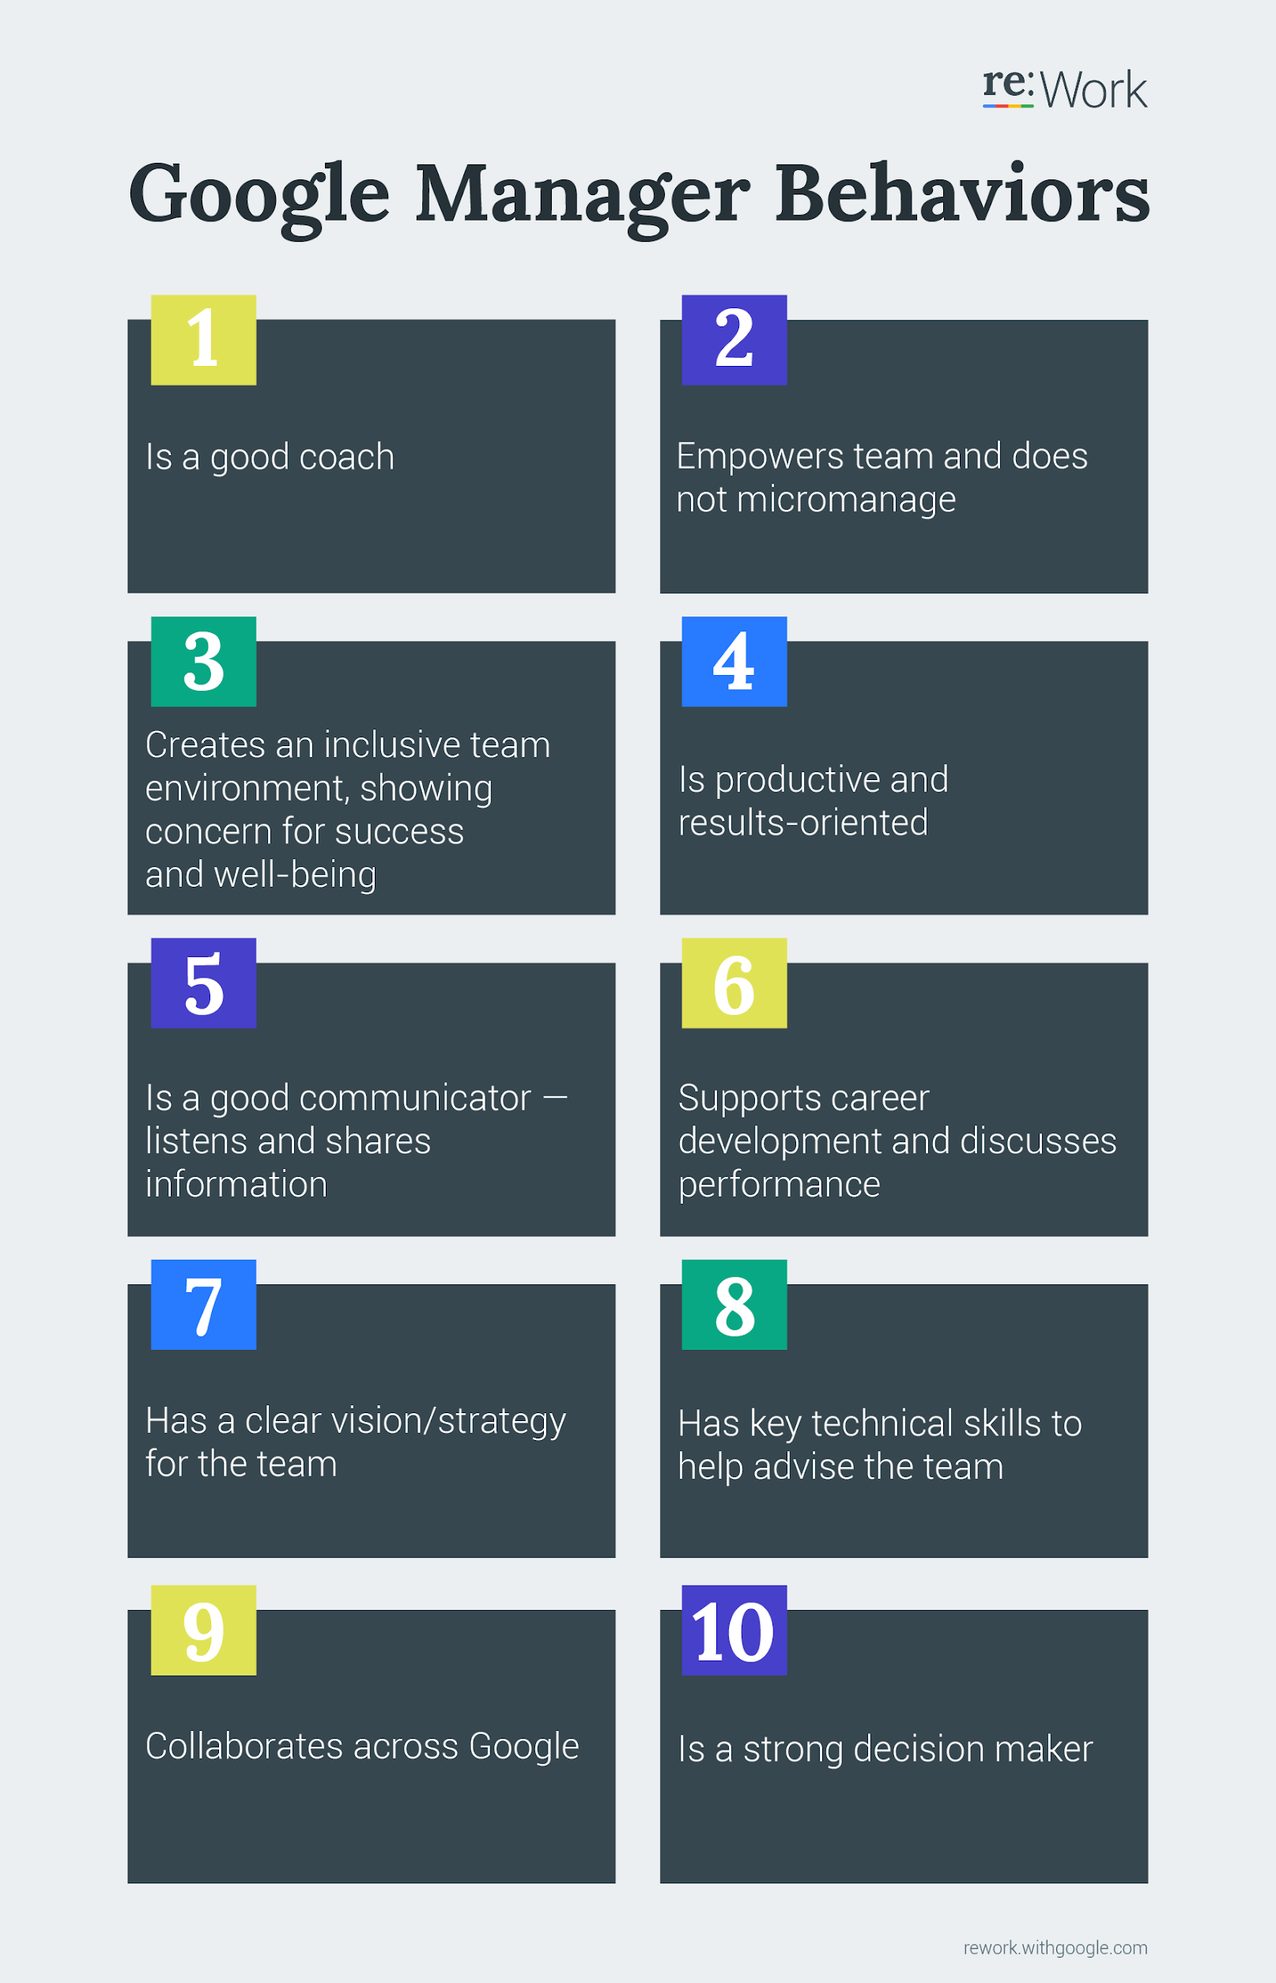 Google’s manager behavior research identifies the traits of effective managers